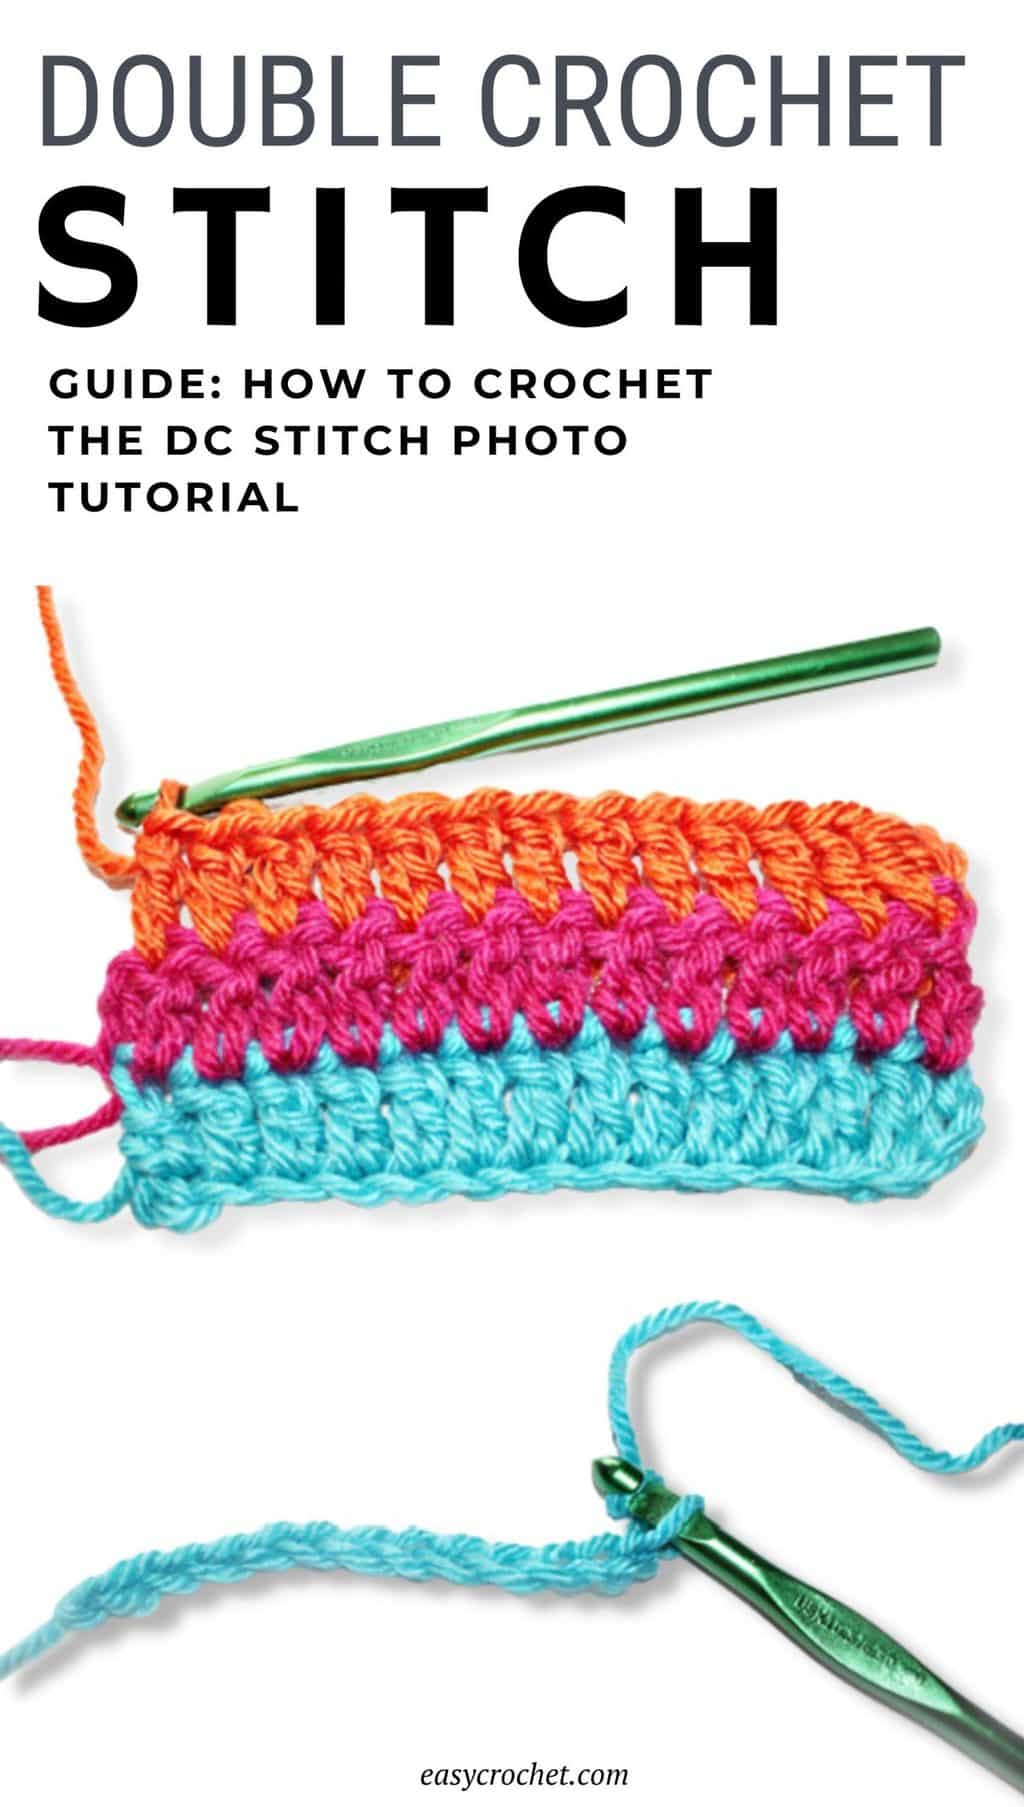 How to double crochet stitch